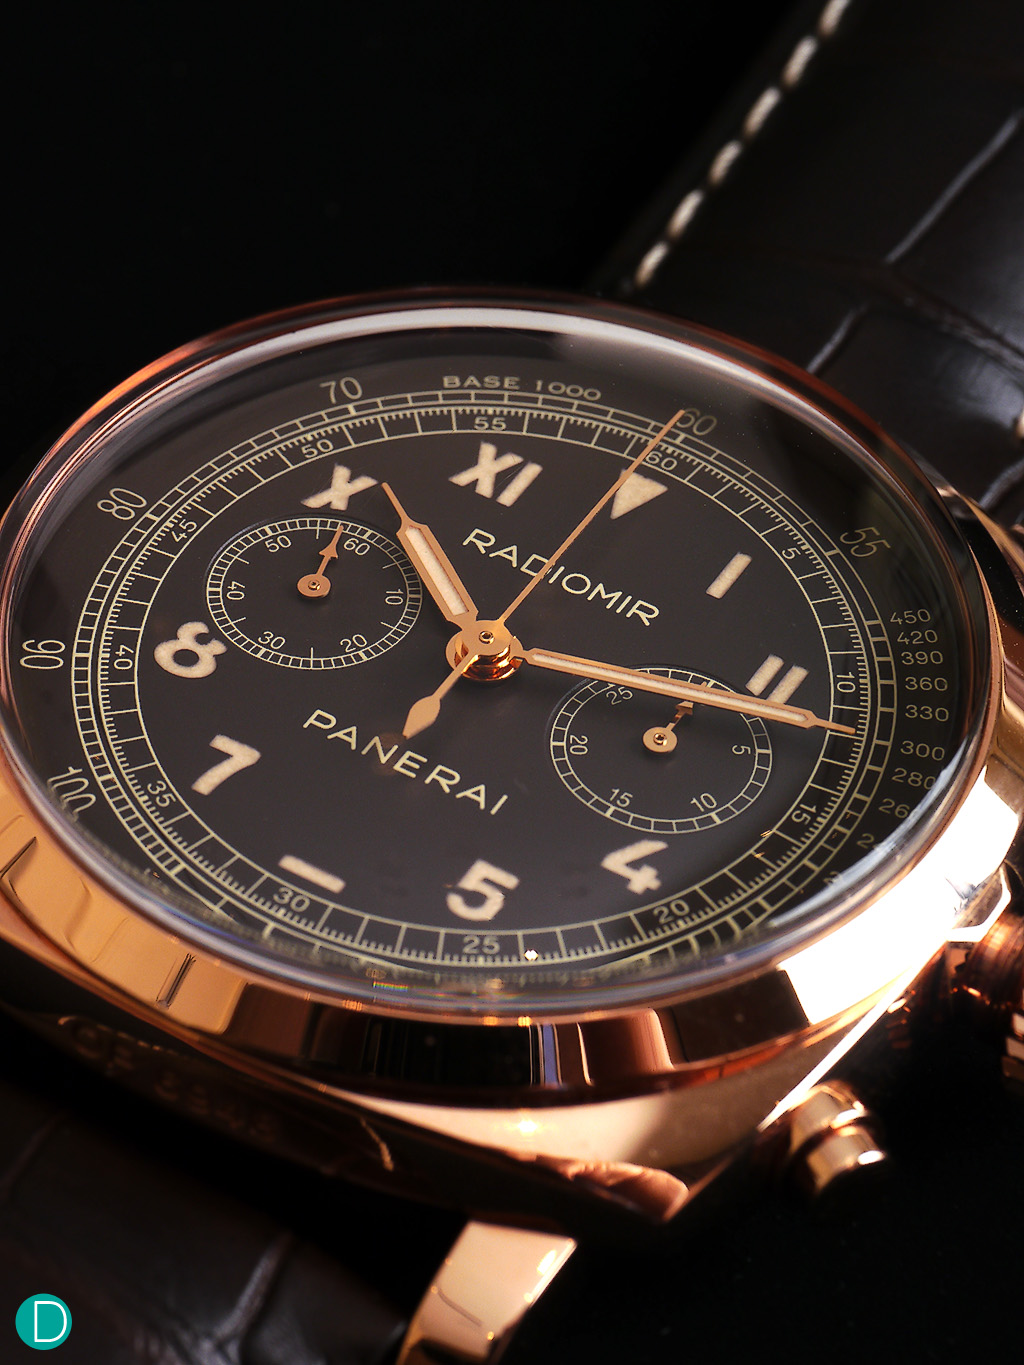 Featuring the California Dial layout would be Panerai 519. Slightly different from the other two chronographs, but this variant is only available in rose gold. 